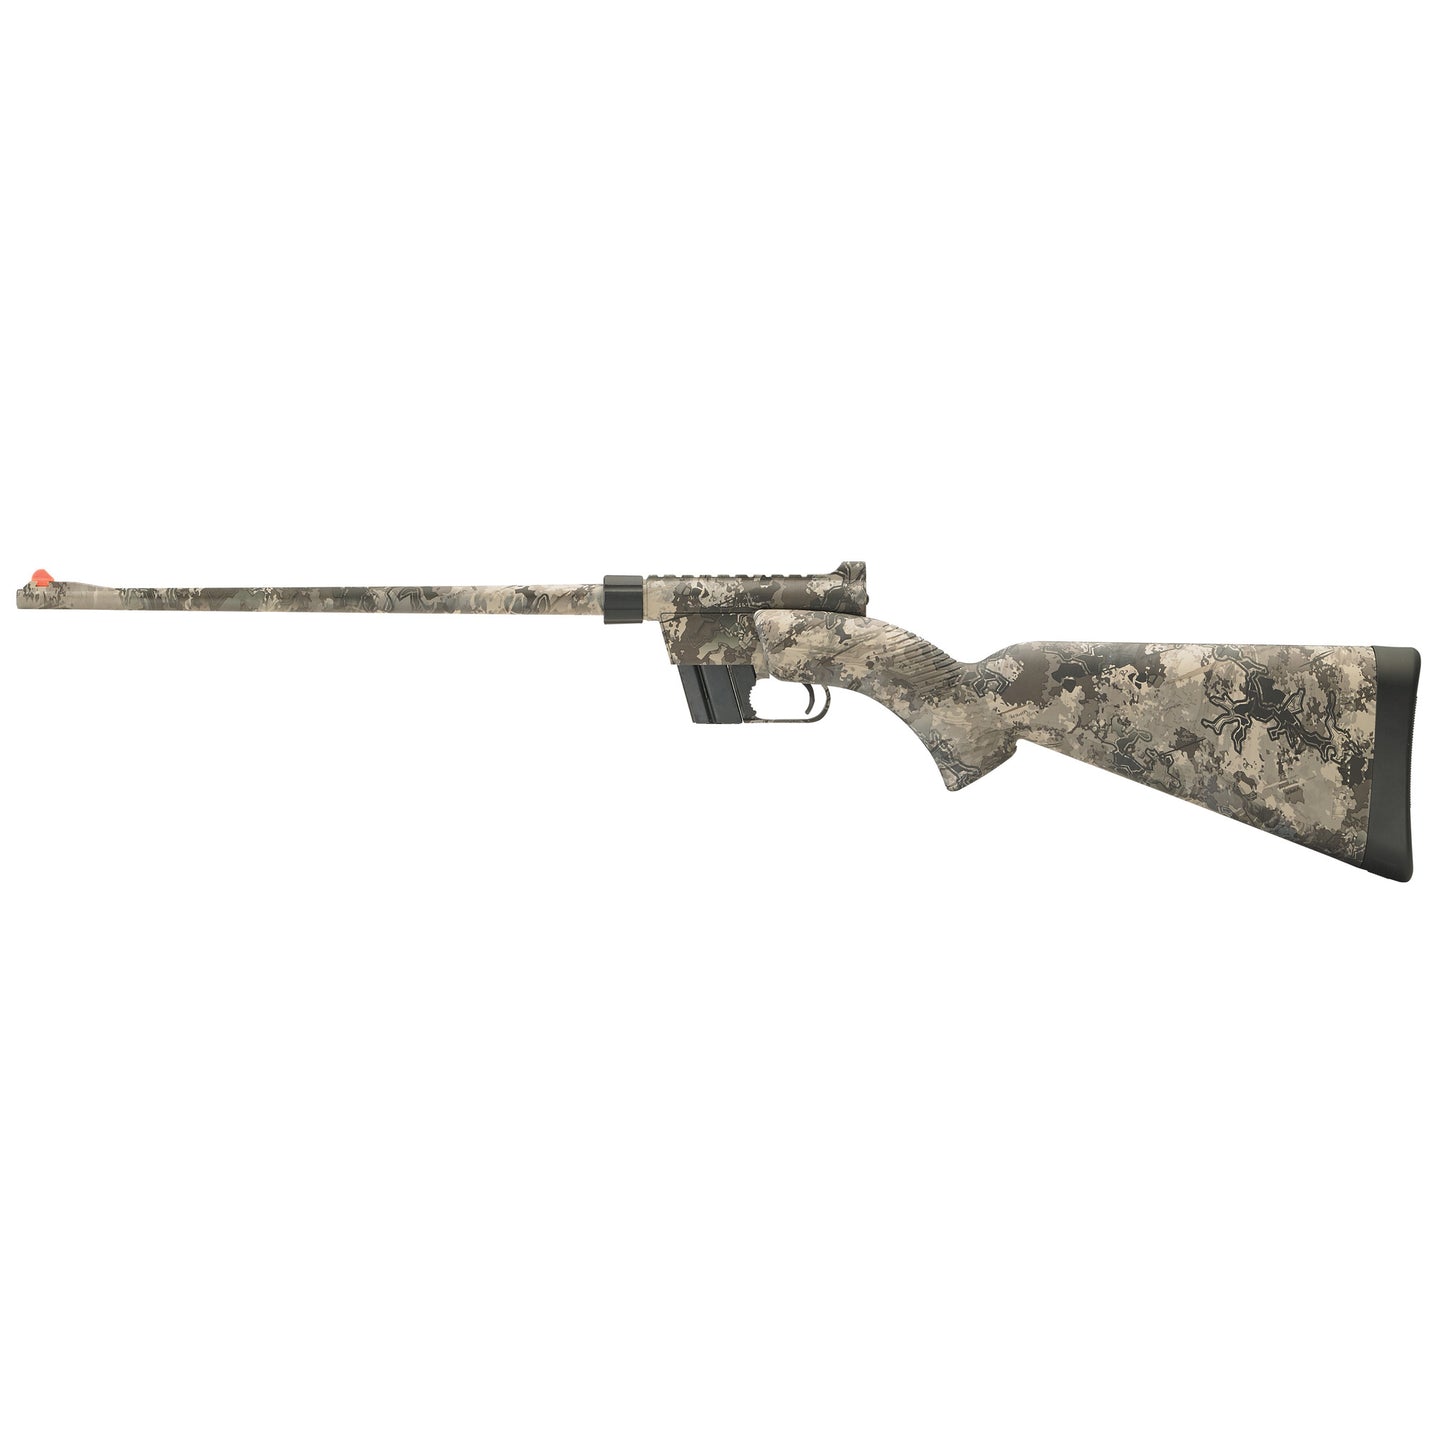 Henry Repeating Arms, US Survival Viper Western, Semi-automatic, 22LR, 16.5" Barrel, Viper Finish, Adjustable Sights, 8Rd, ABS Plastic Stock